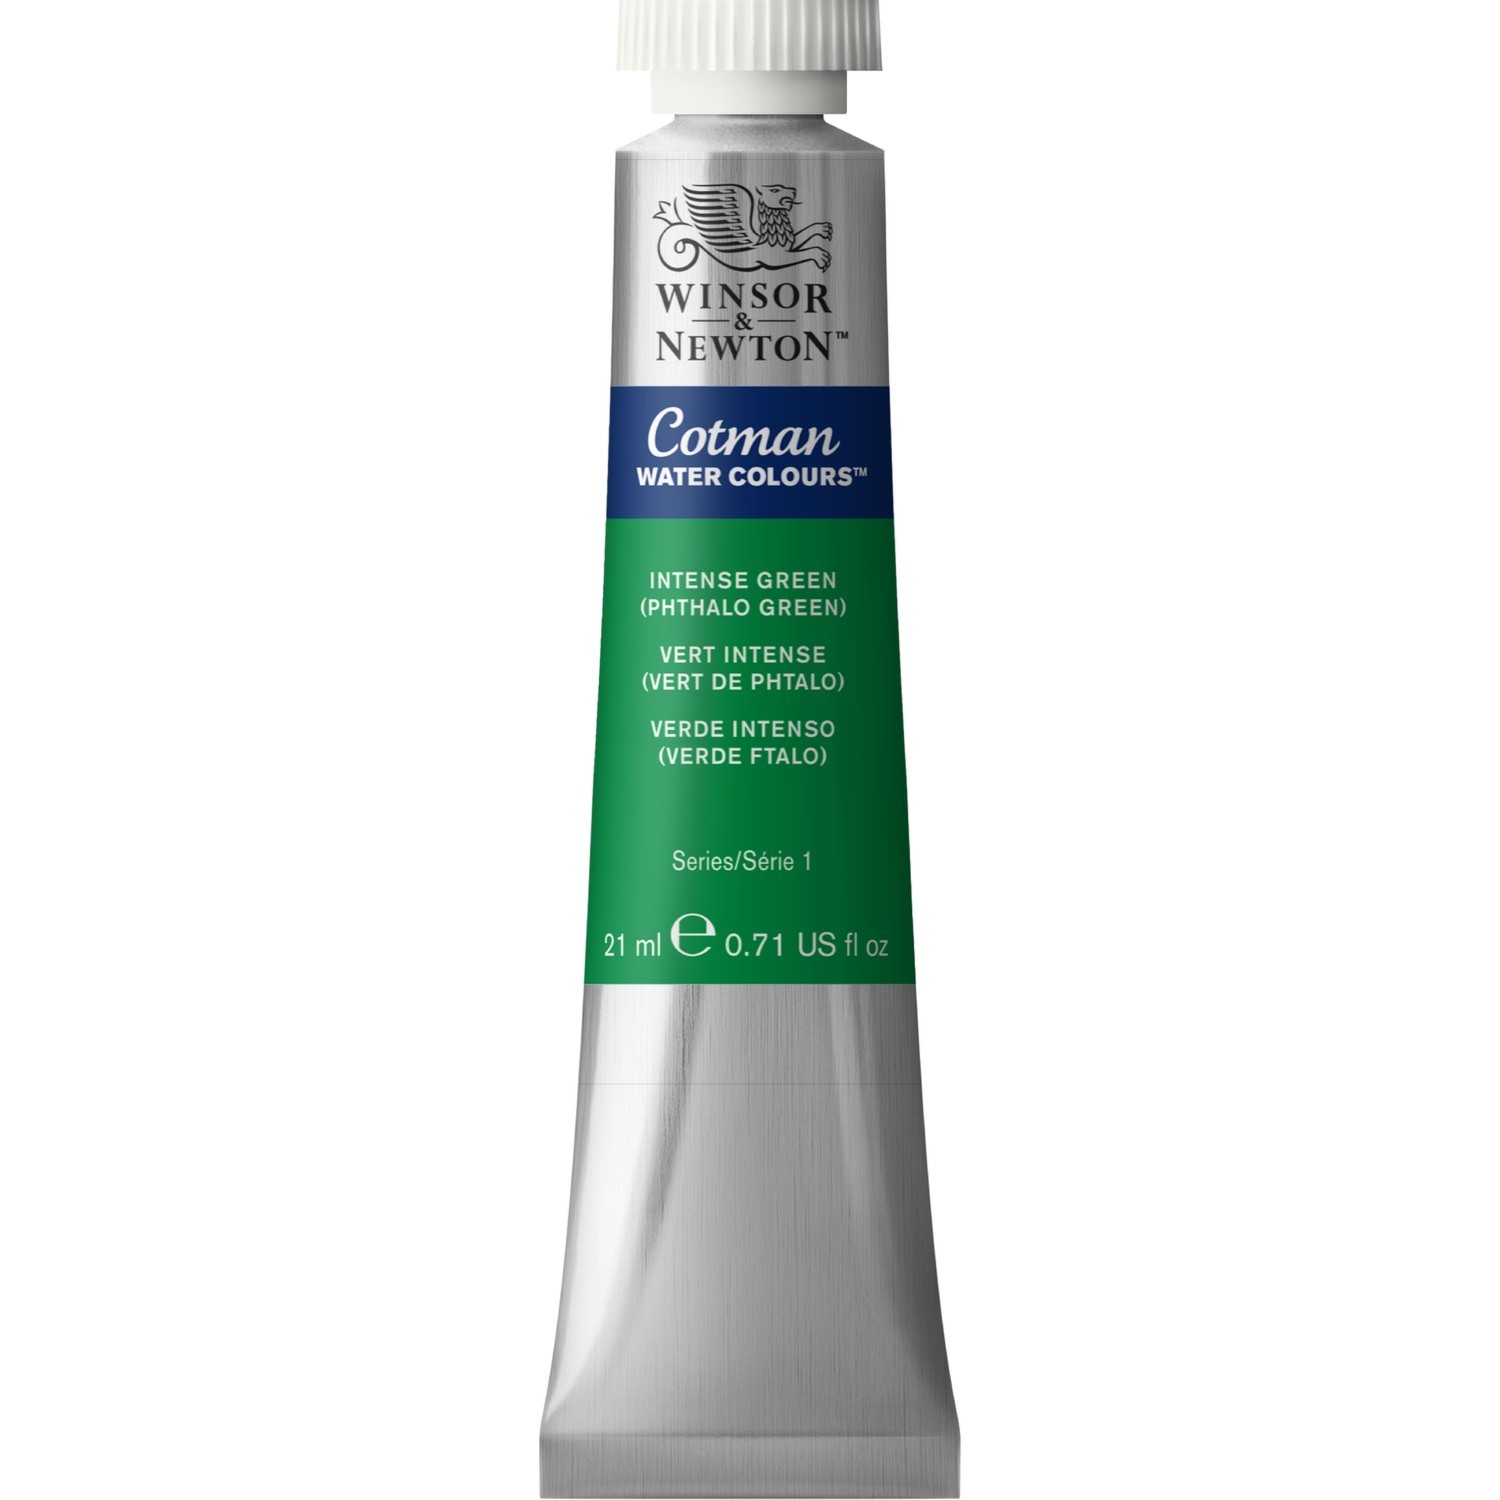 Winsor and Newton Cotman Watercolour Paint 21ml - Green Image 1